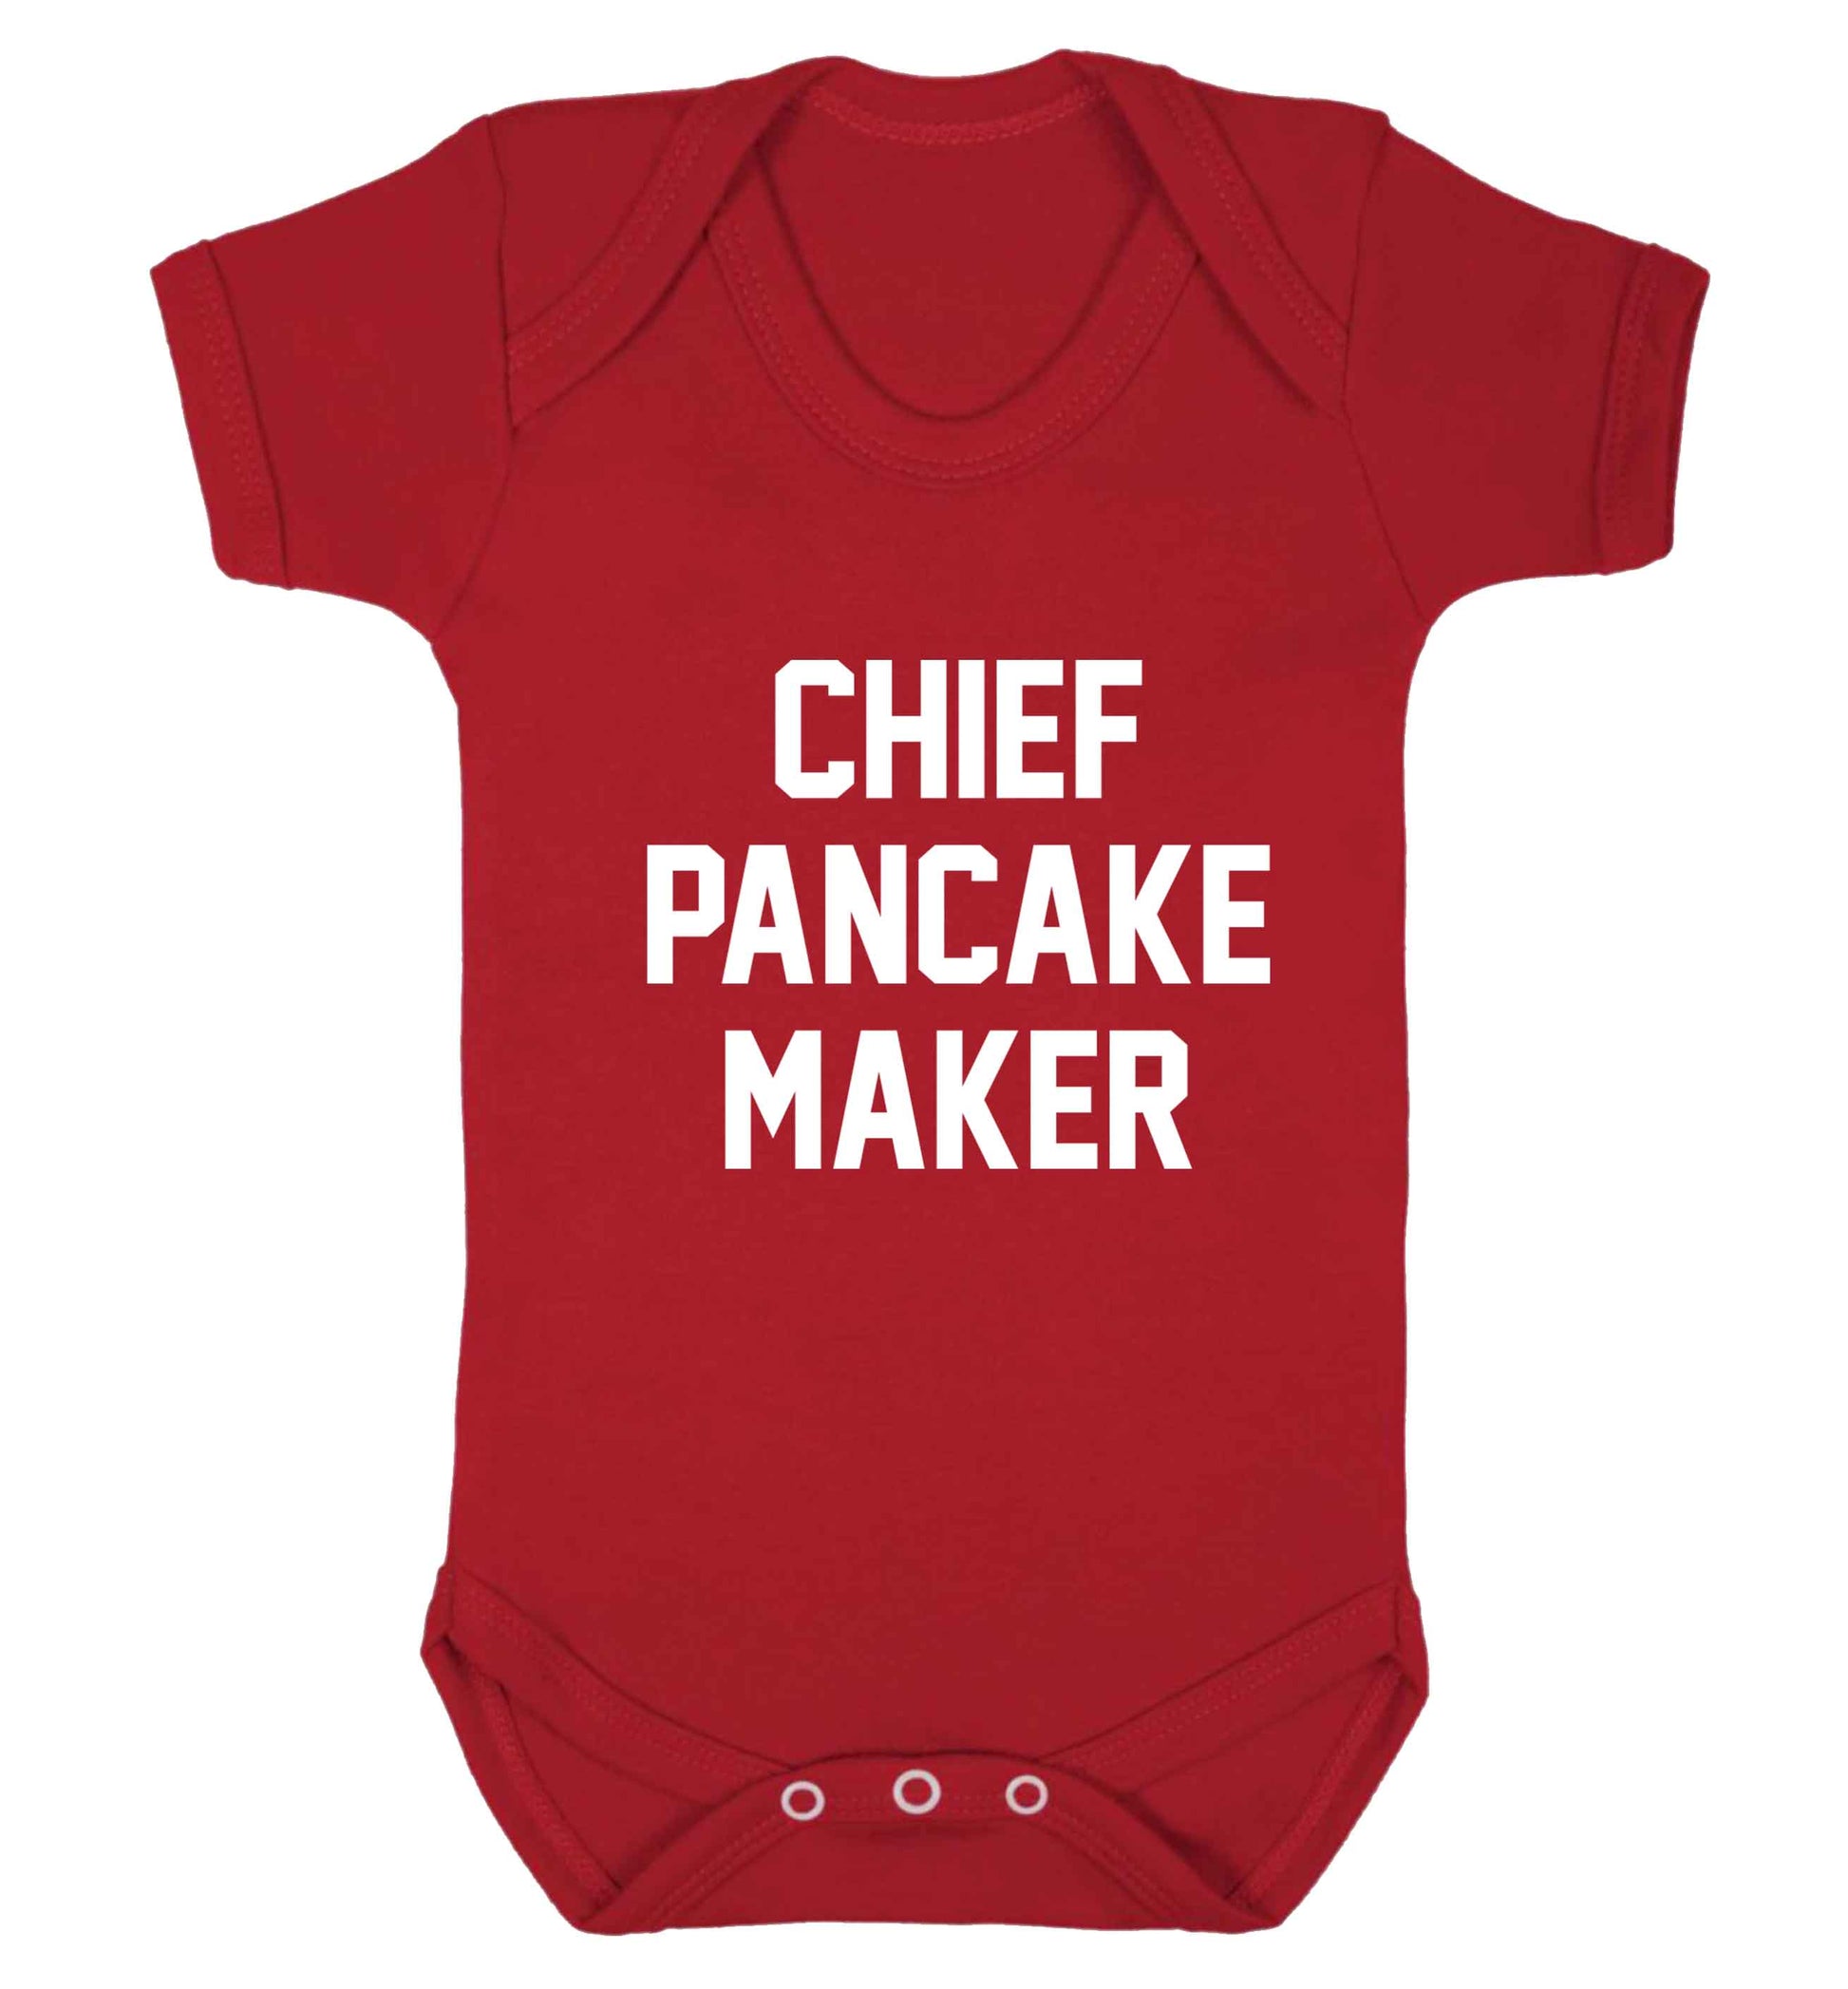 Chief pancake maker baby vest red 18-24 months